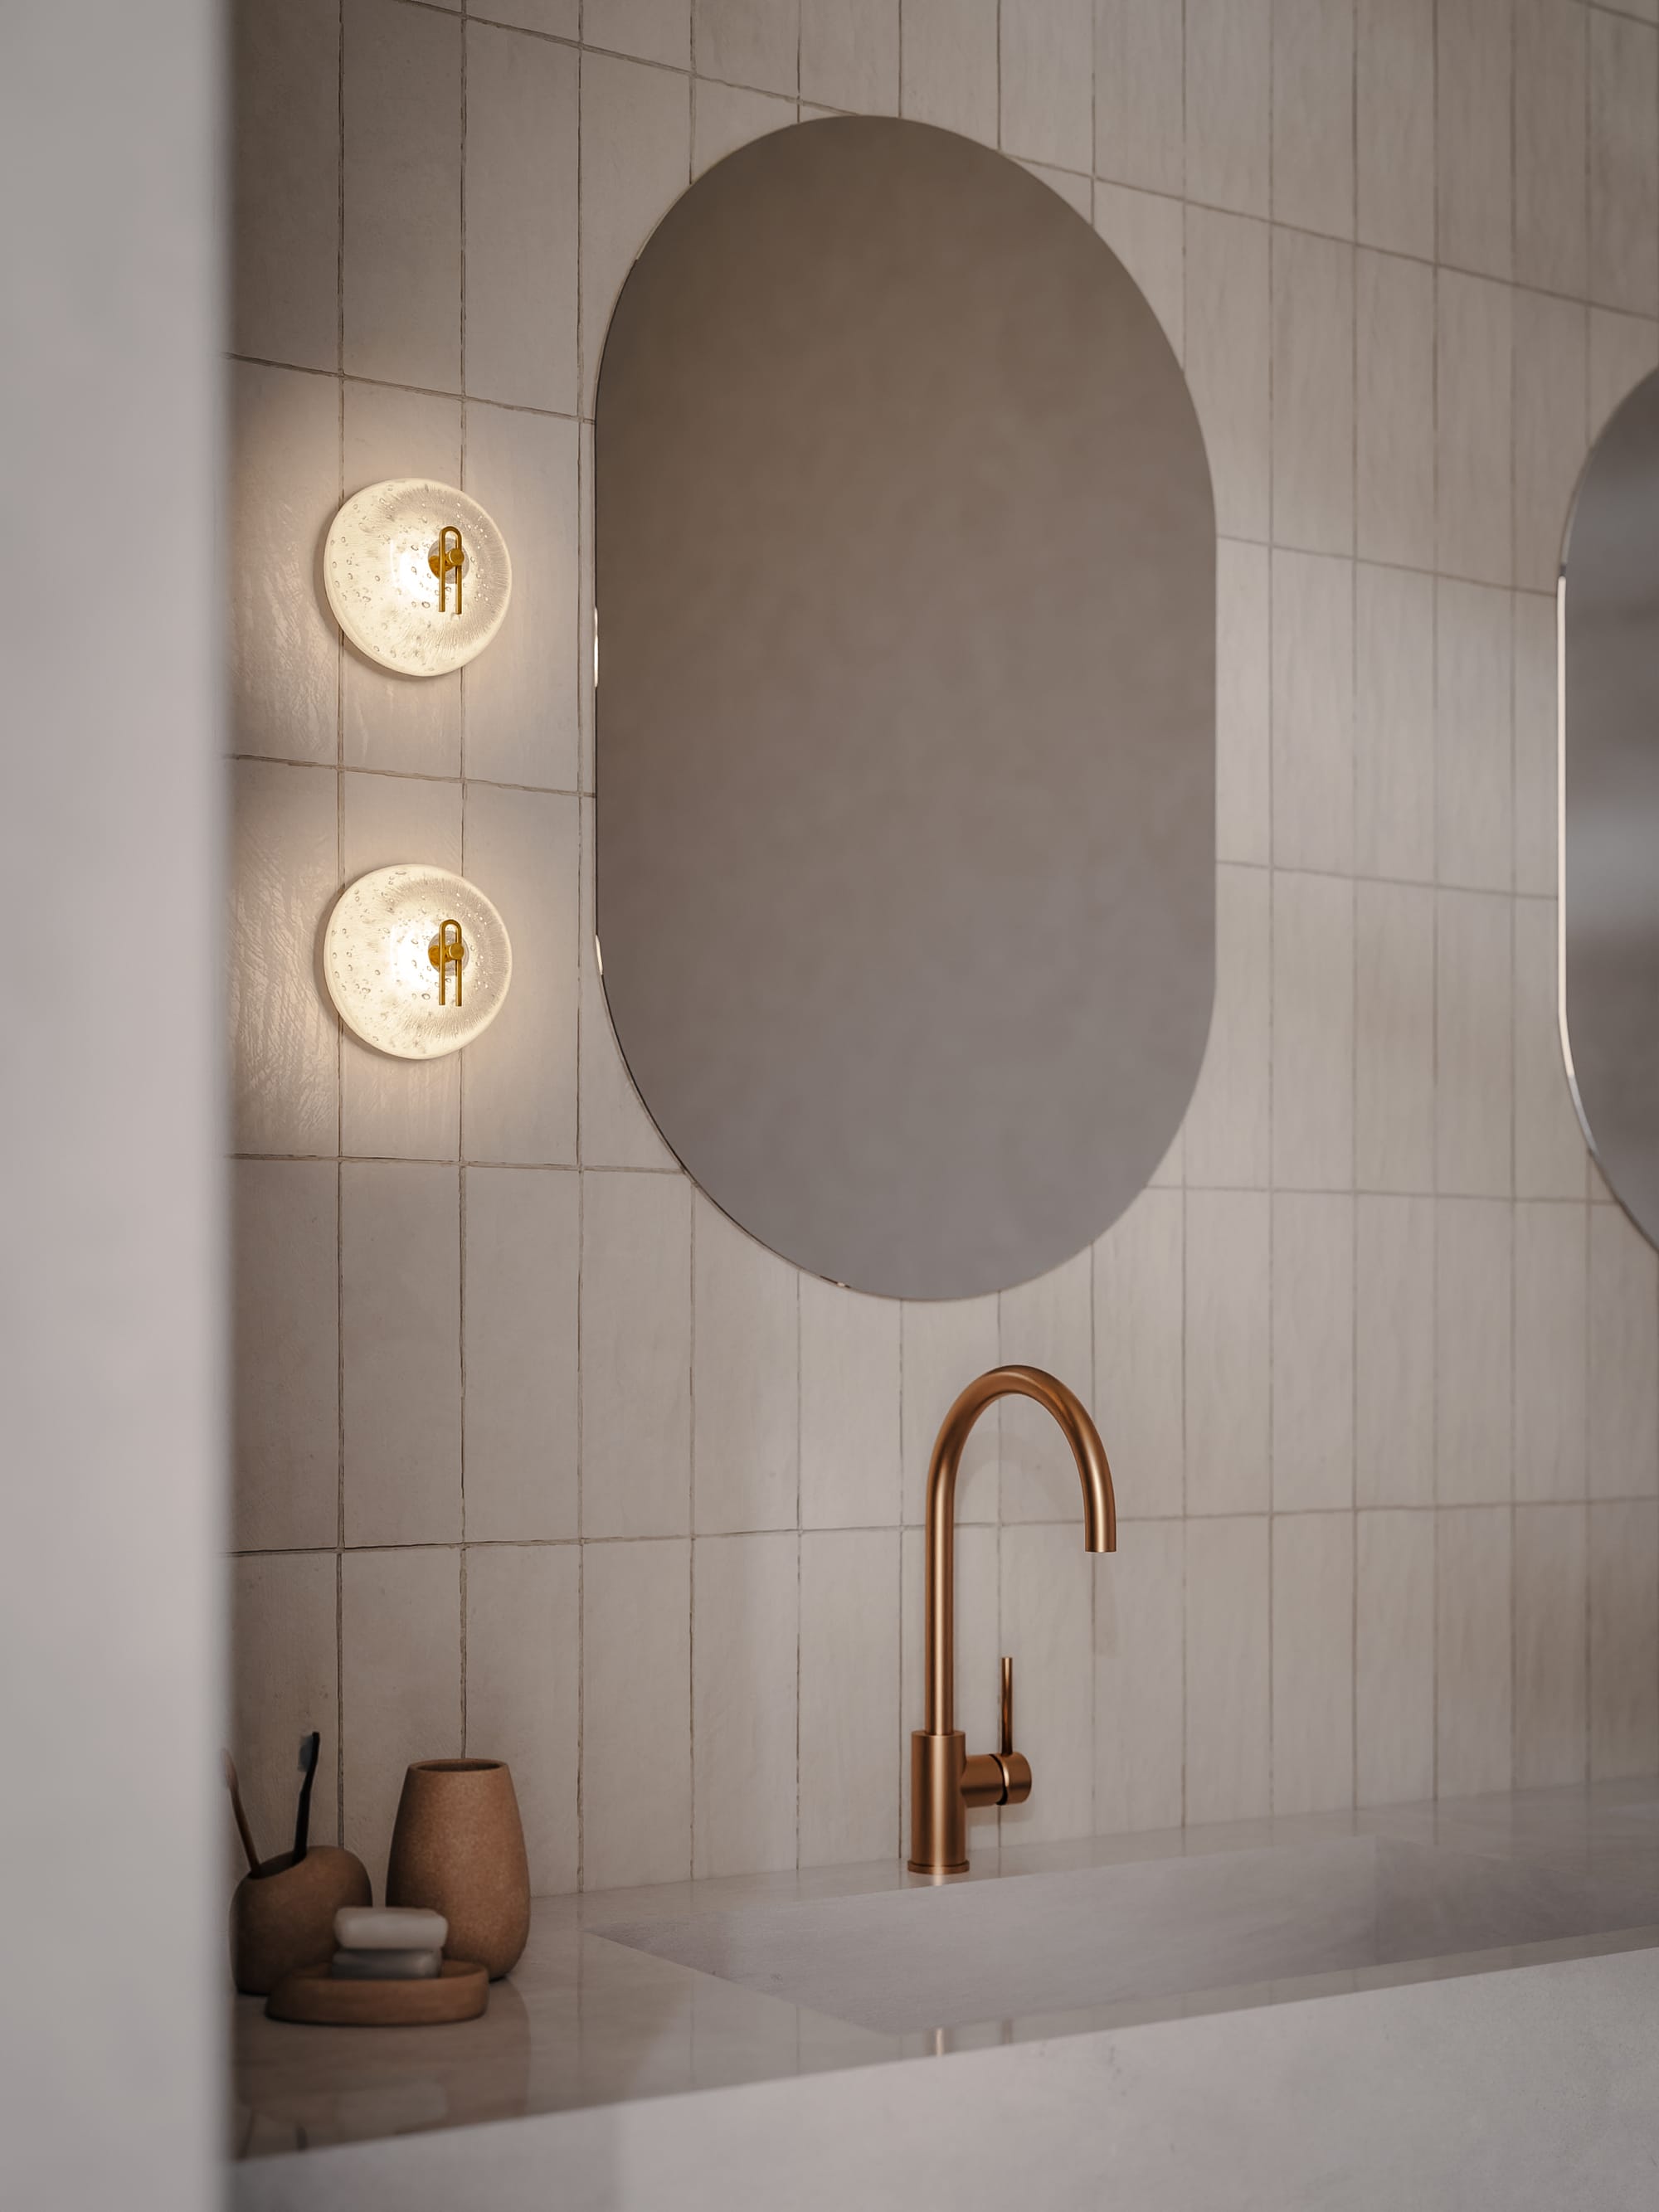 Point Five by South Drawn. Image copyright of South Drawn. Bathroom with white wall tiles and curved mirrors. Two domed warm wall sconces hung next to mirror.